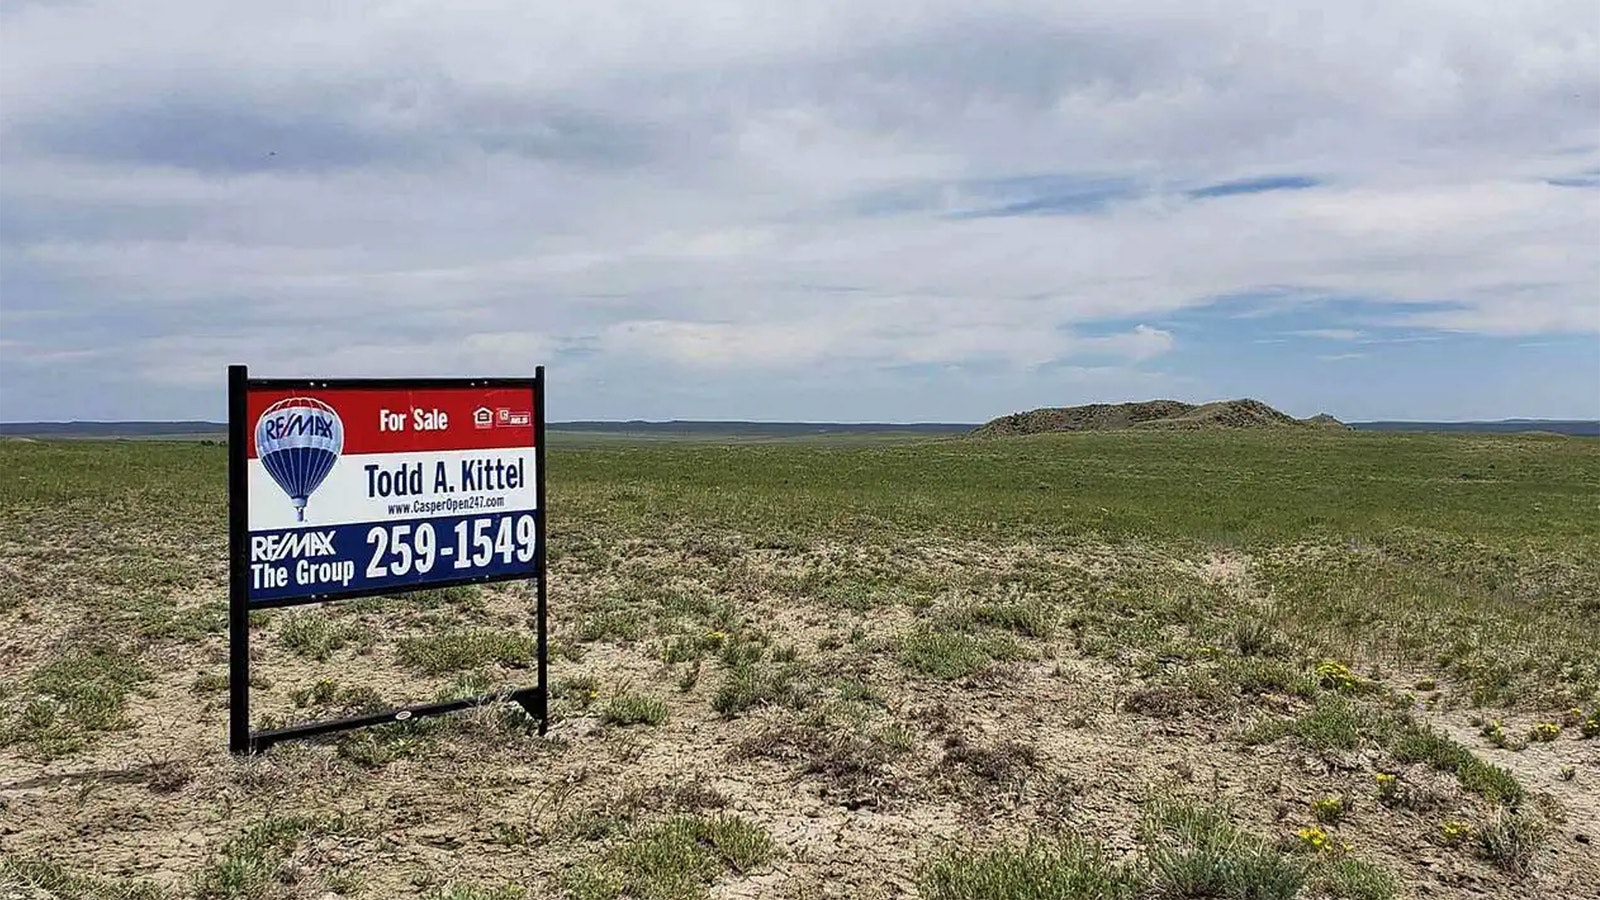 Landsearch.com has listings for more than 40 tracts of Wyoming land that would be good for off-grid living, including this 40.5-acre parcel in Natrona County.